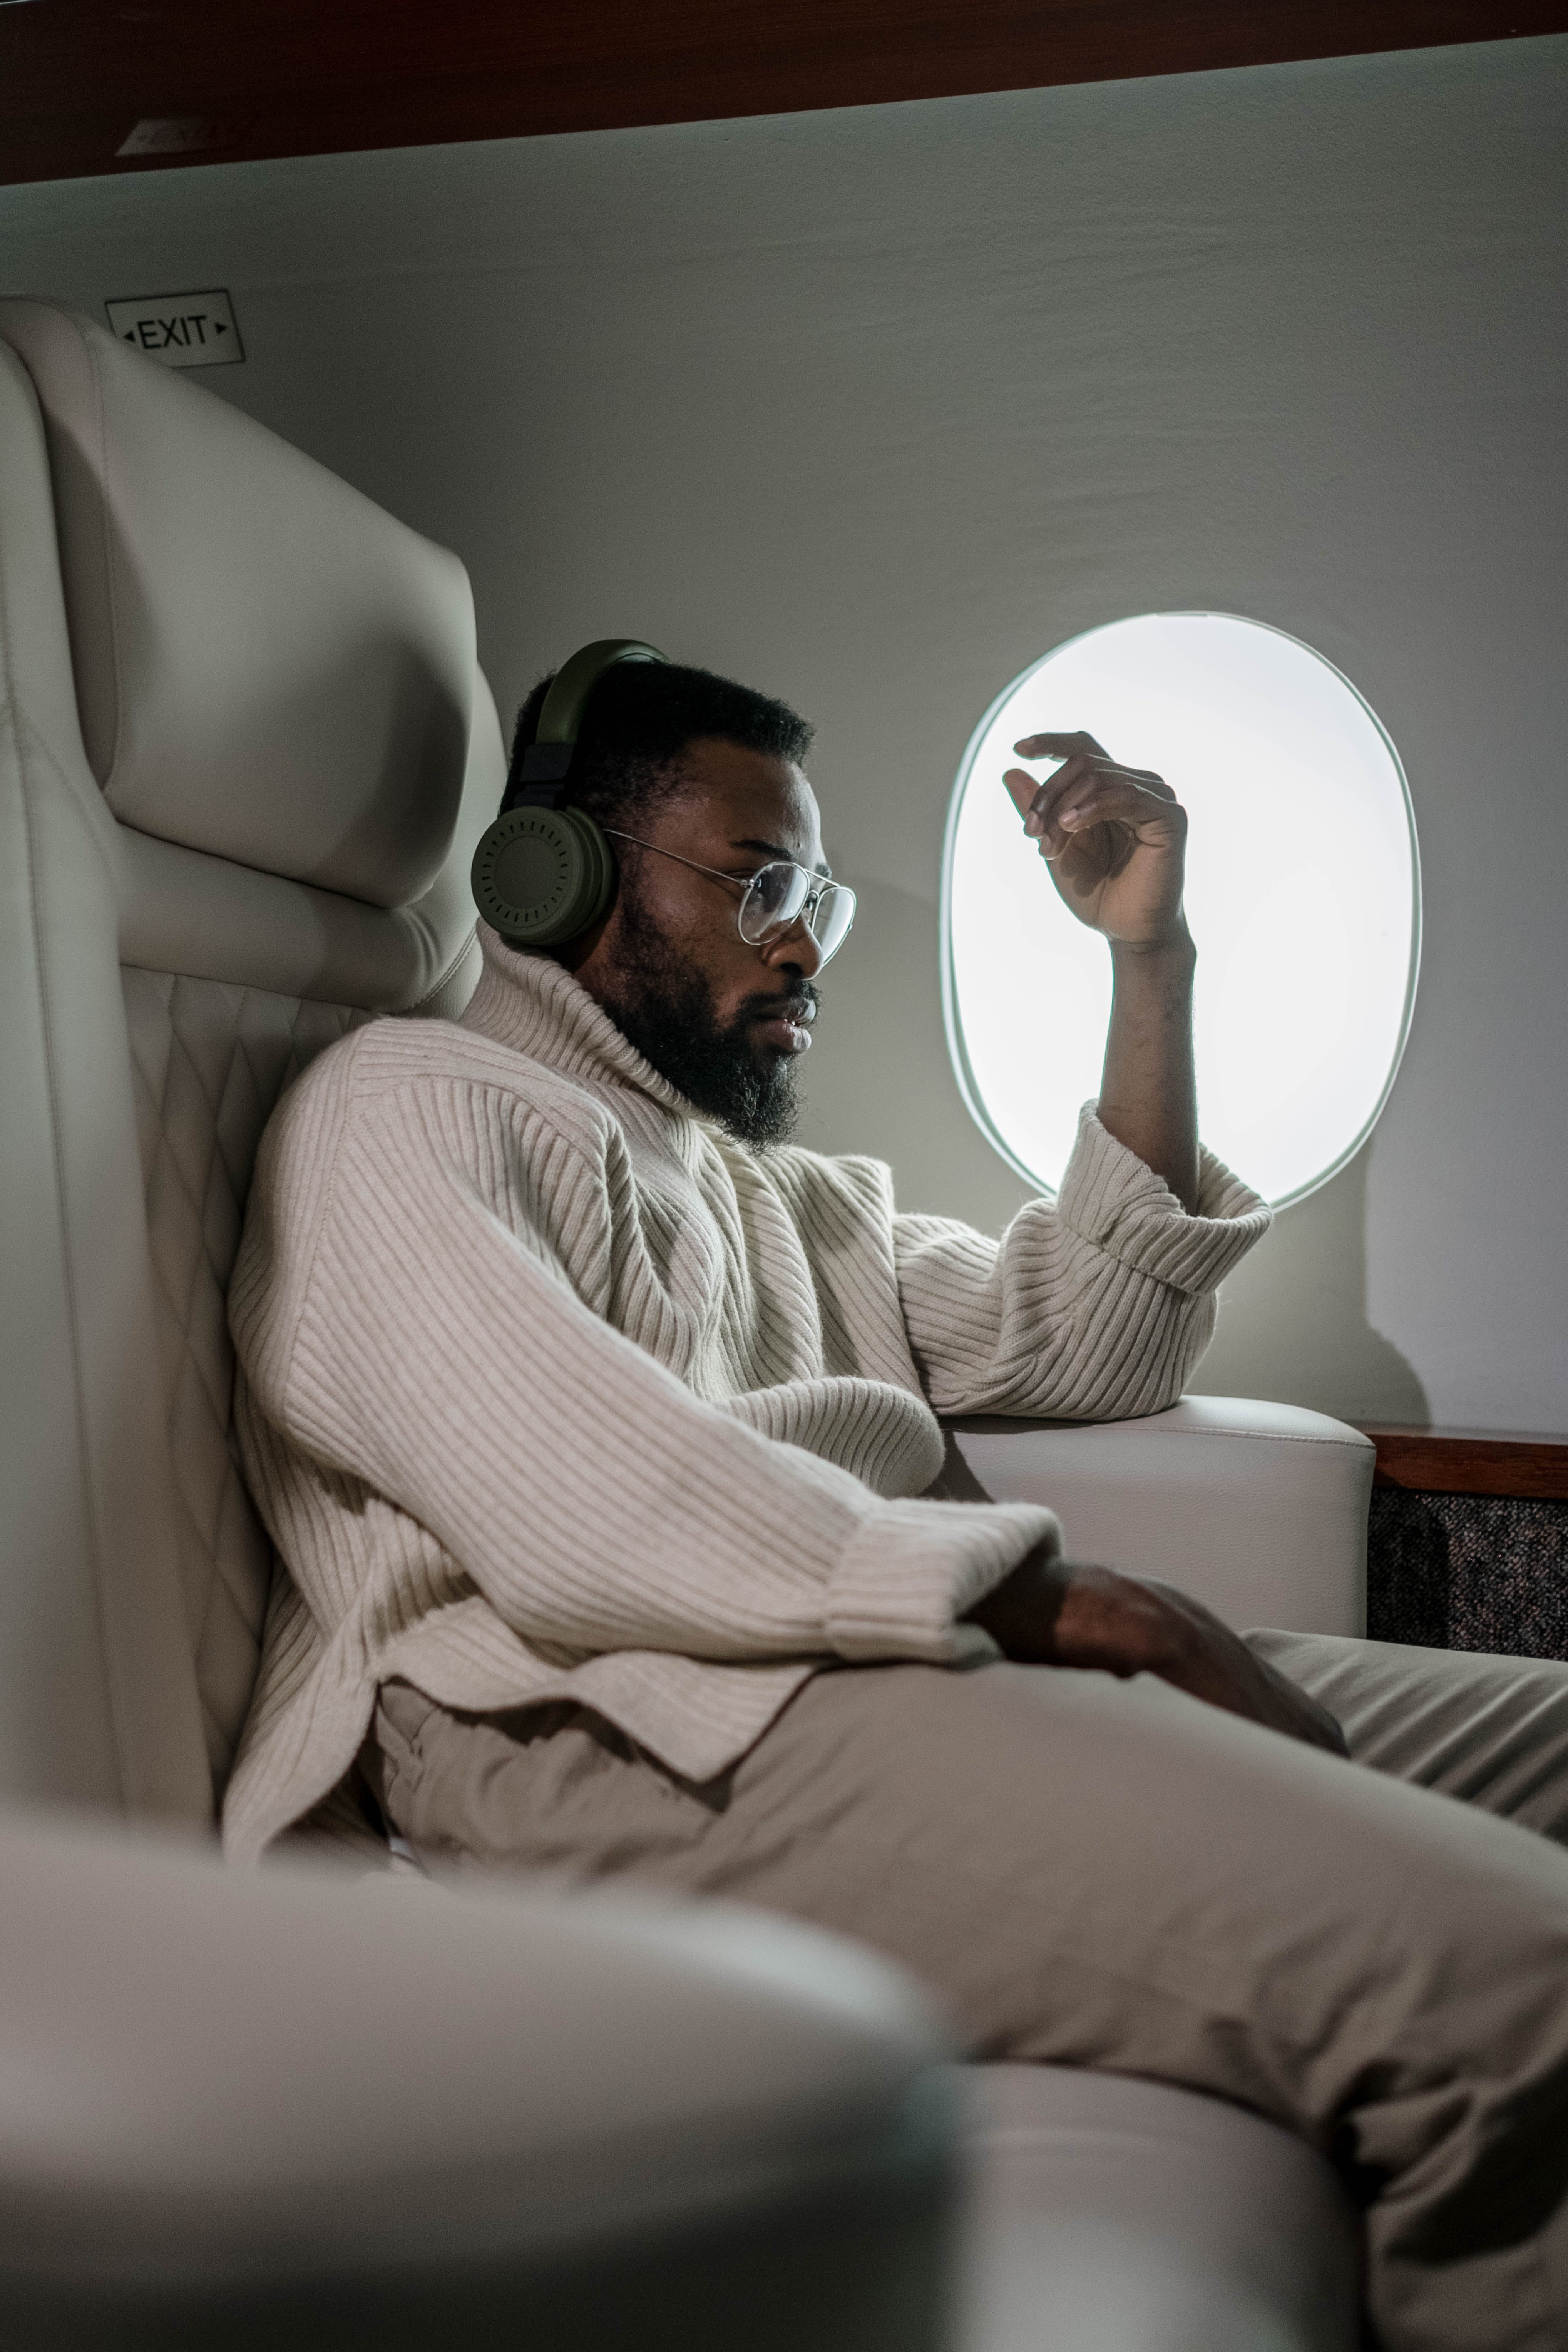 A man in business class | Source: Pexels